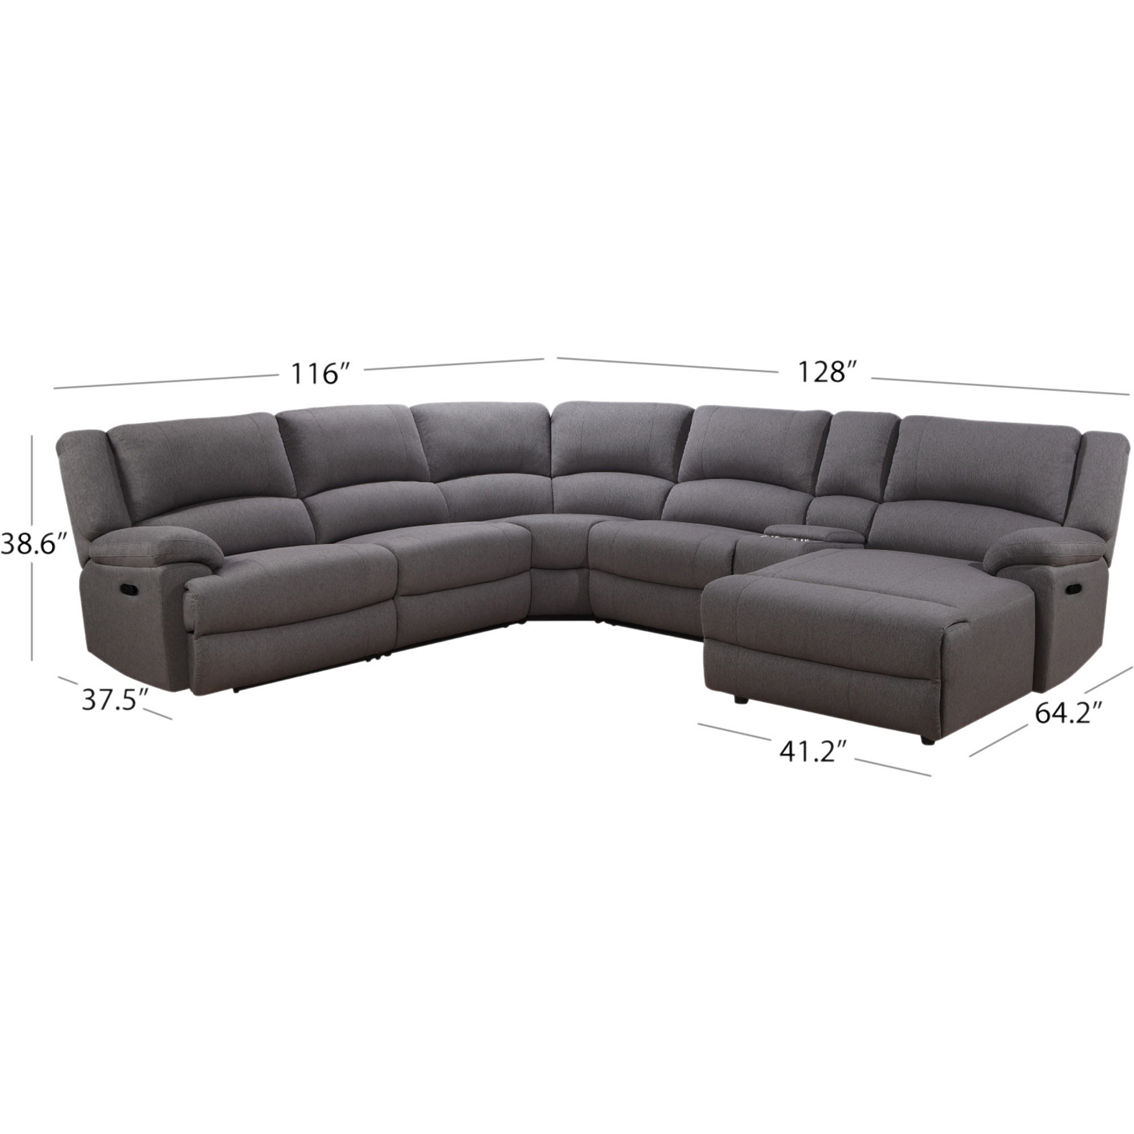 Abbyson Fletcher Stain Resistant Fabric Reclining Sectional 6 pc. Set, Gray - Image 9 of 9